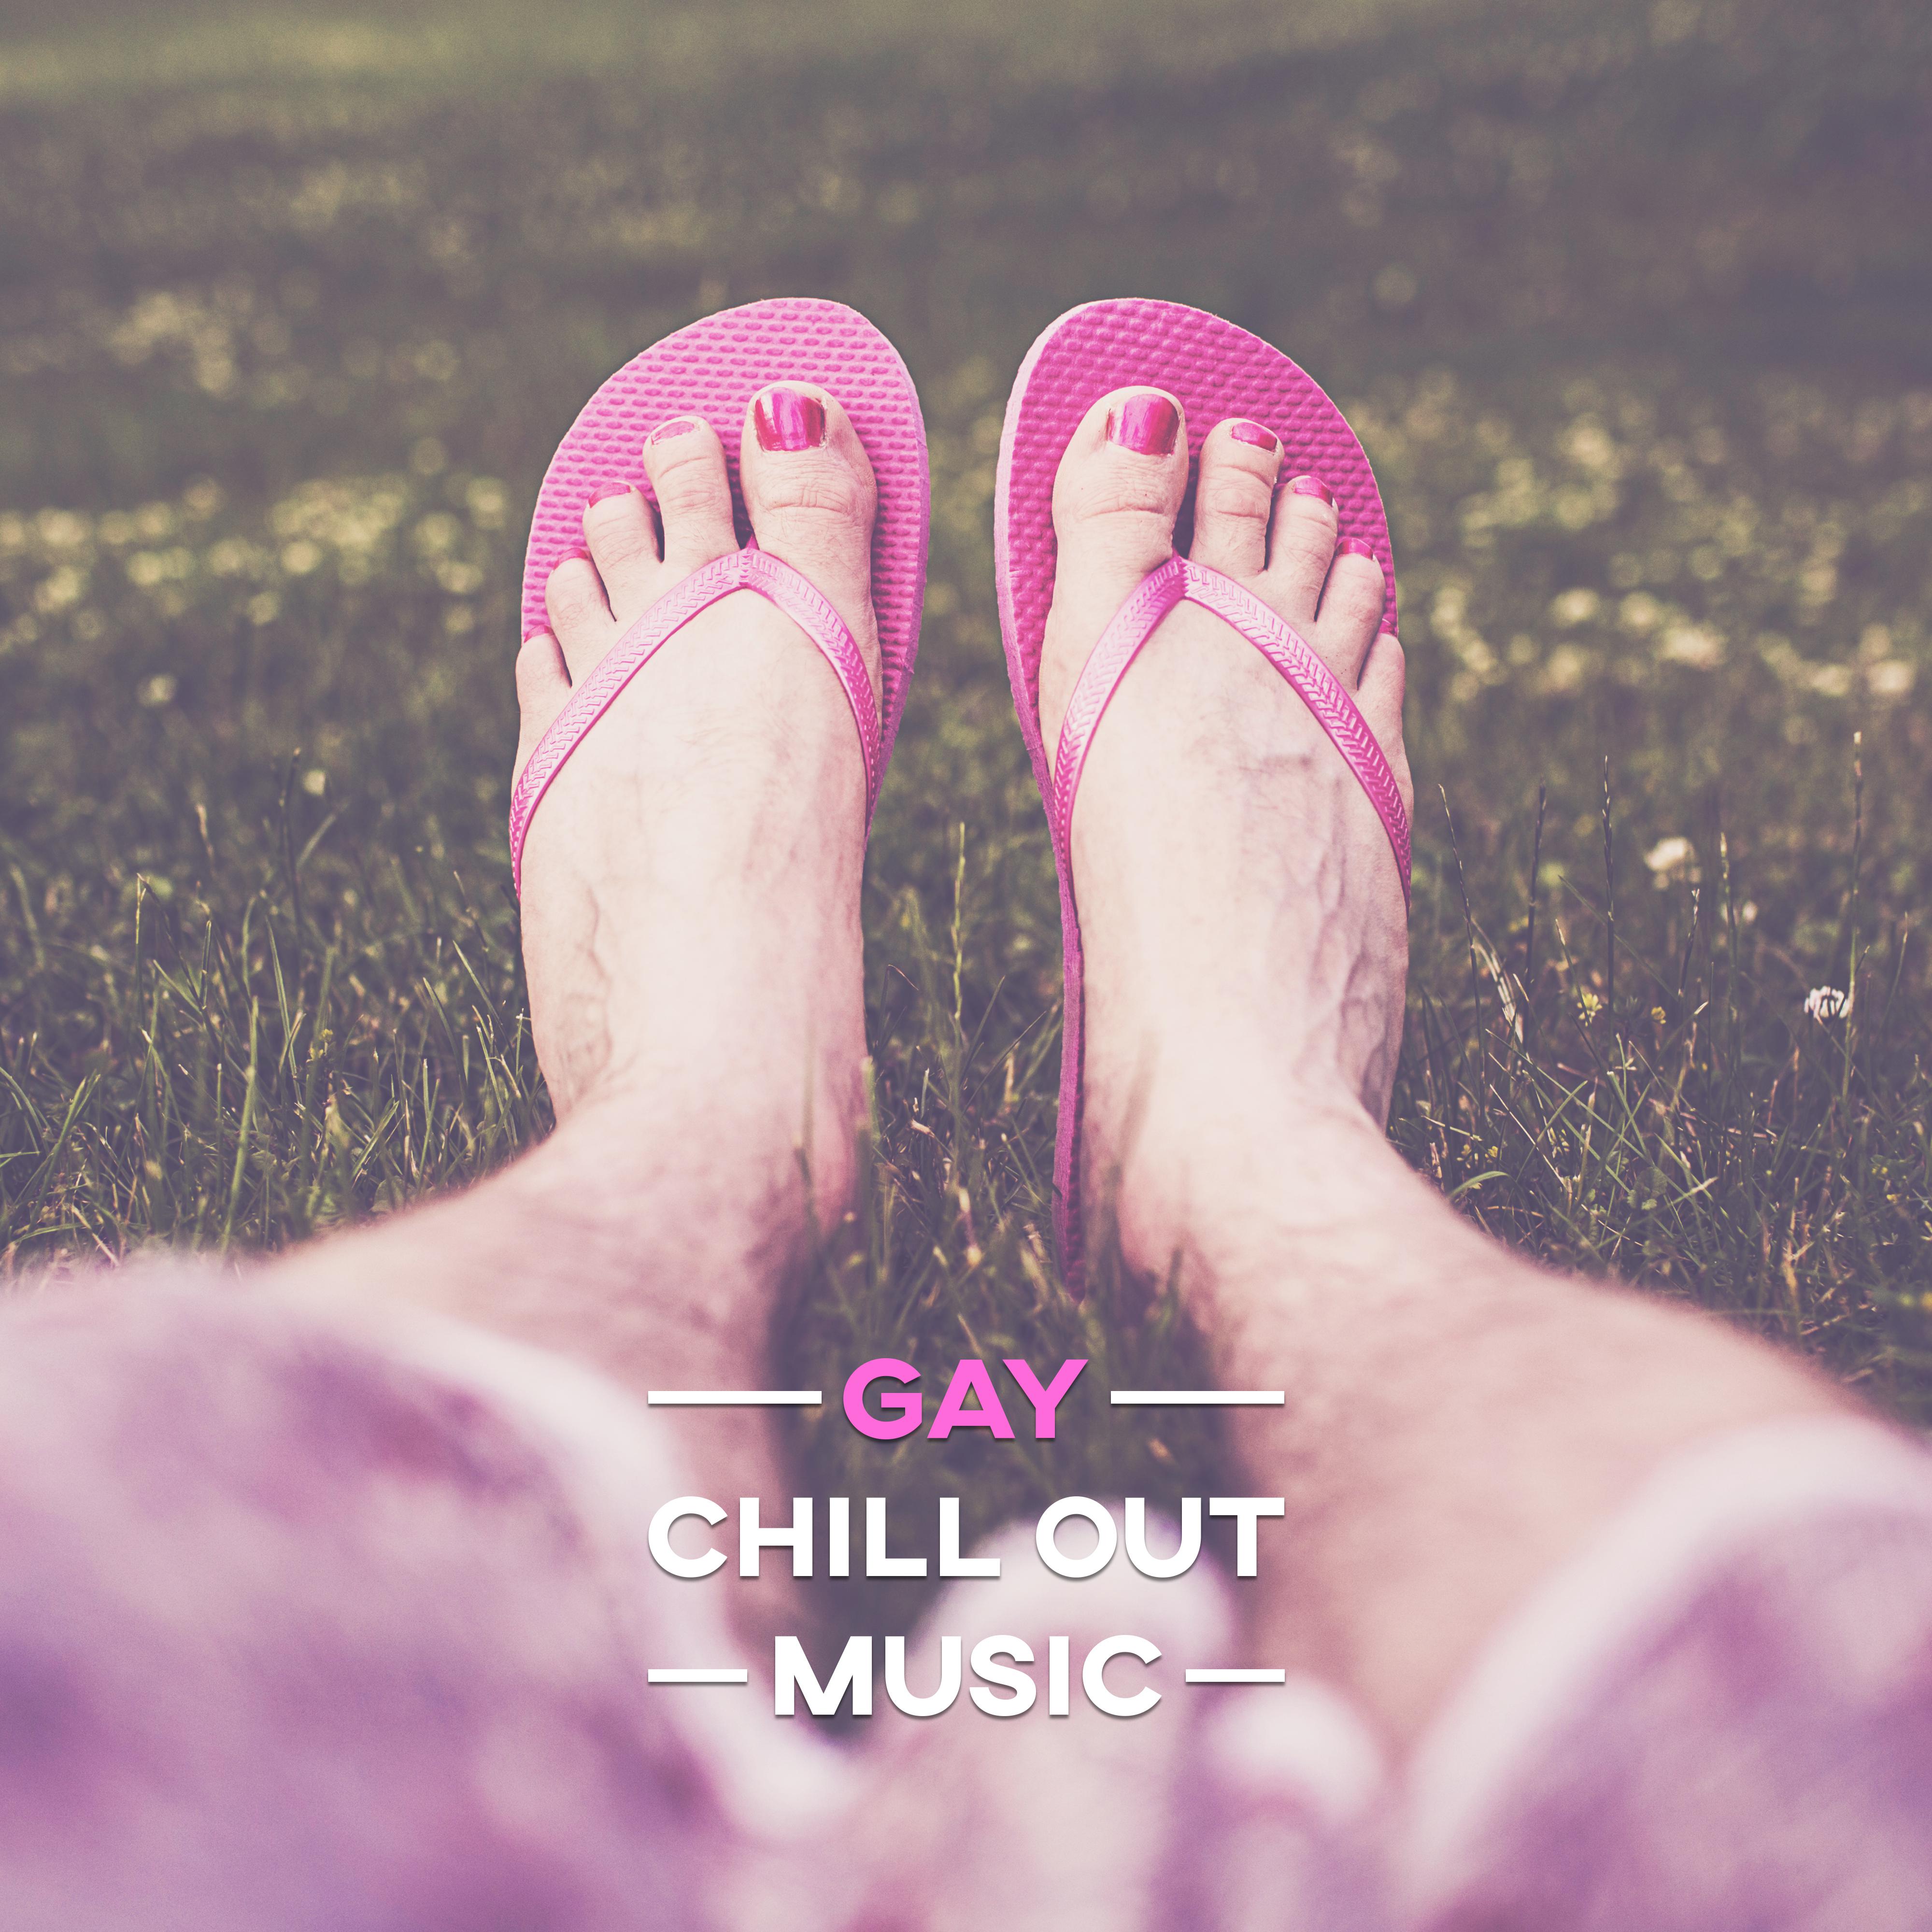 Gay Chill Out Music - The Best Chillout Music, Party, Deep Chill, Gay Party, Holidays Music, Summer Solstice